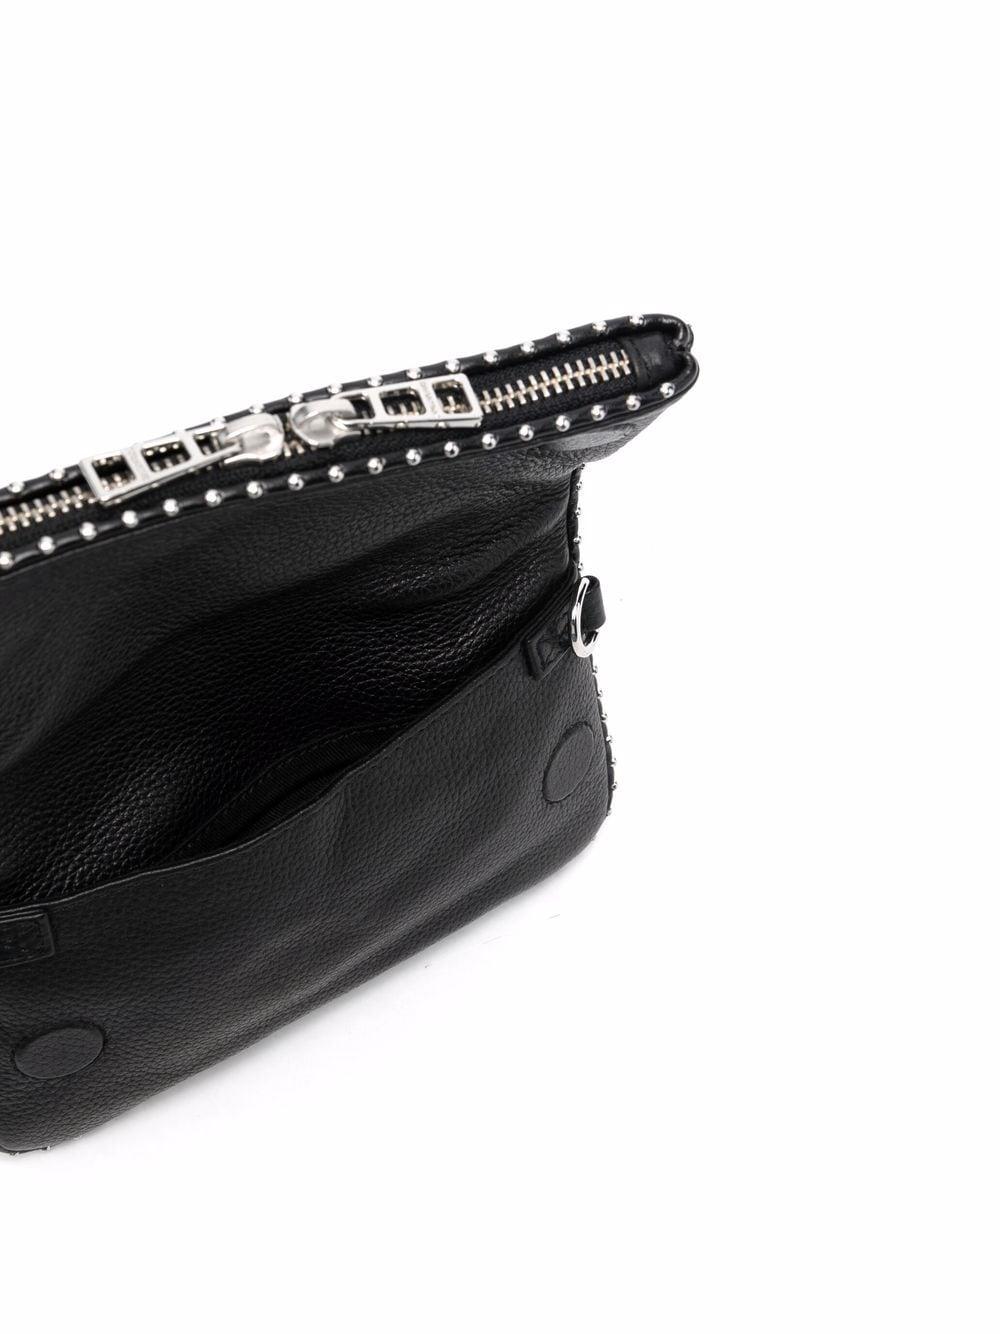 Zadig & Voltaire Rock Nano Studded Suede Clutch Bag in Black - Save 60% |  Lyst